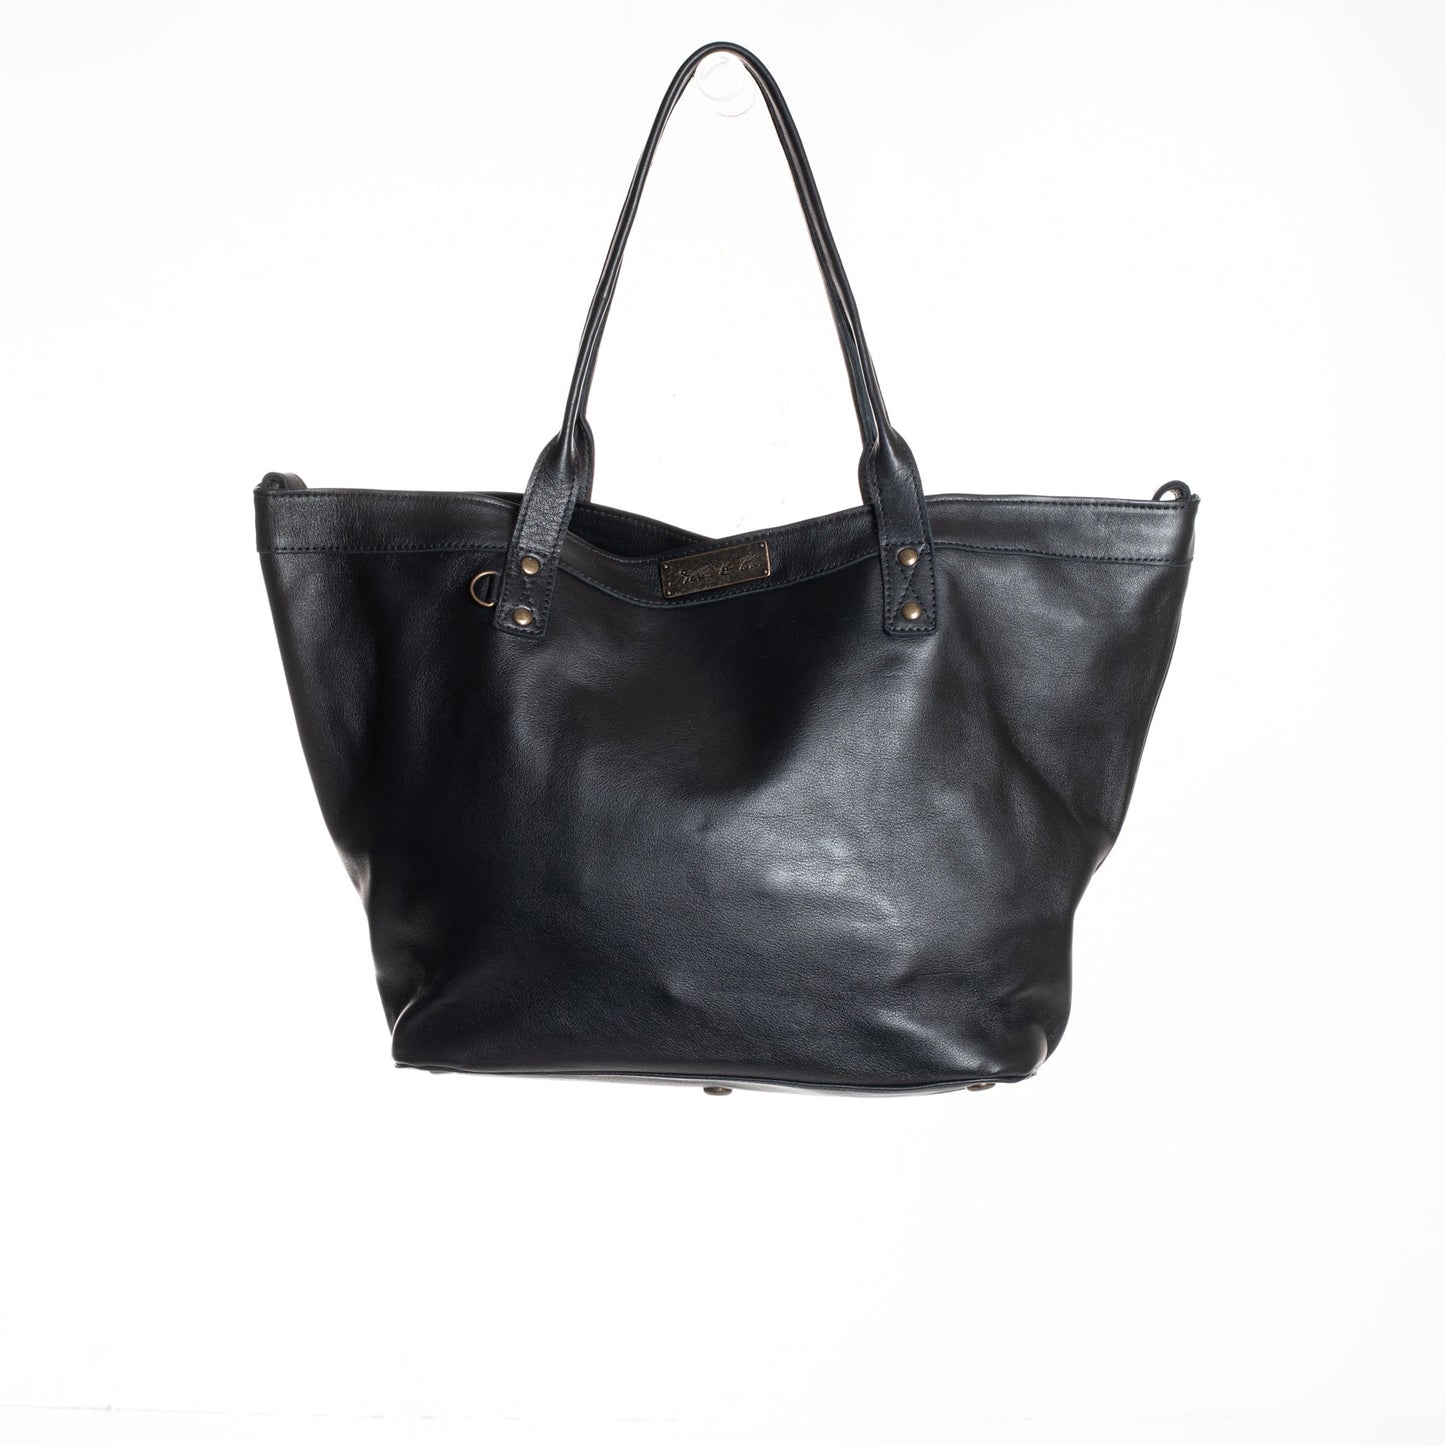 CONVERTIBLE TOTE - FULL LEATHER COLLECTION - BLACK